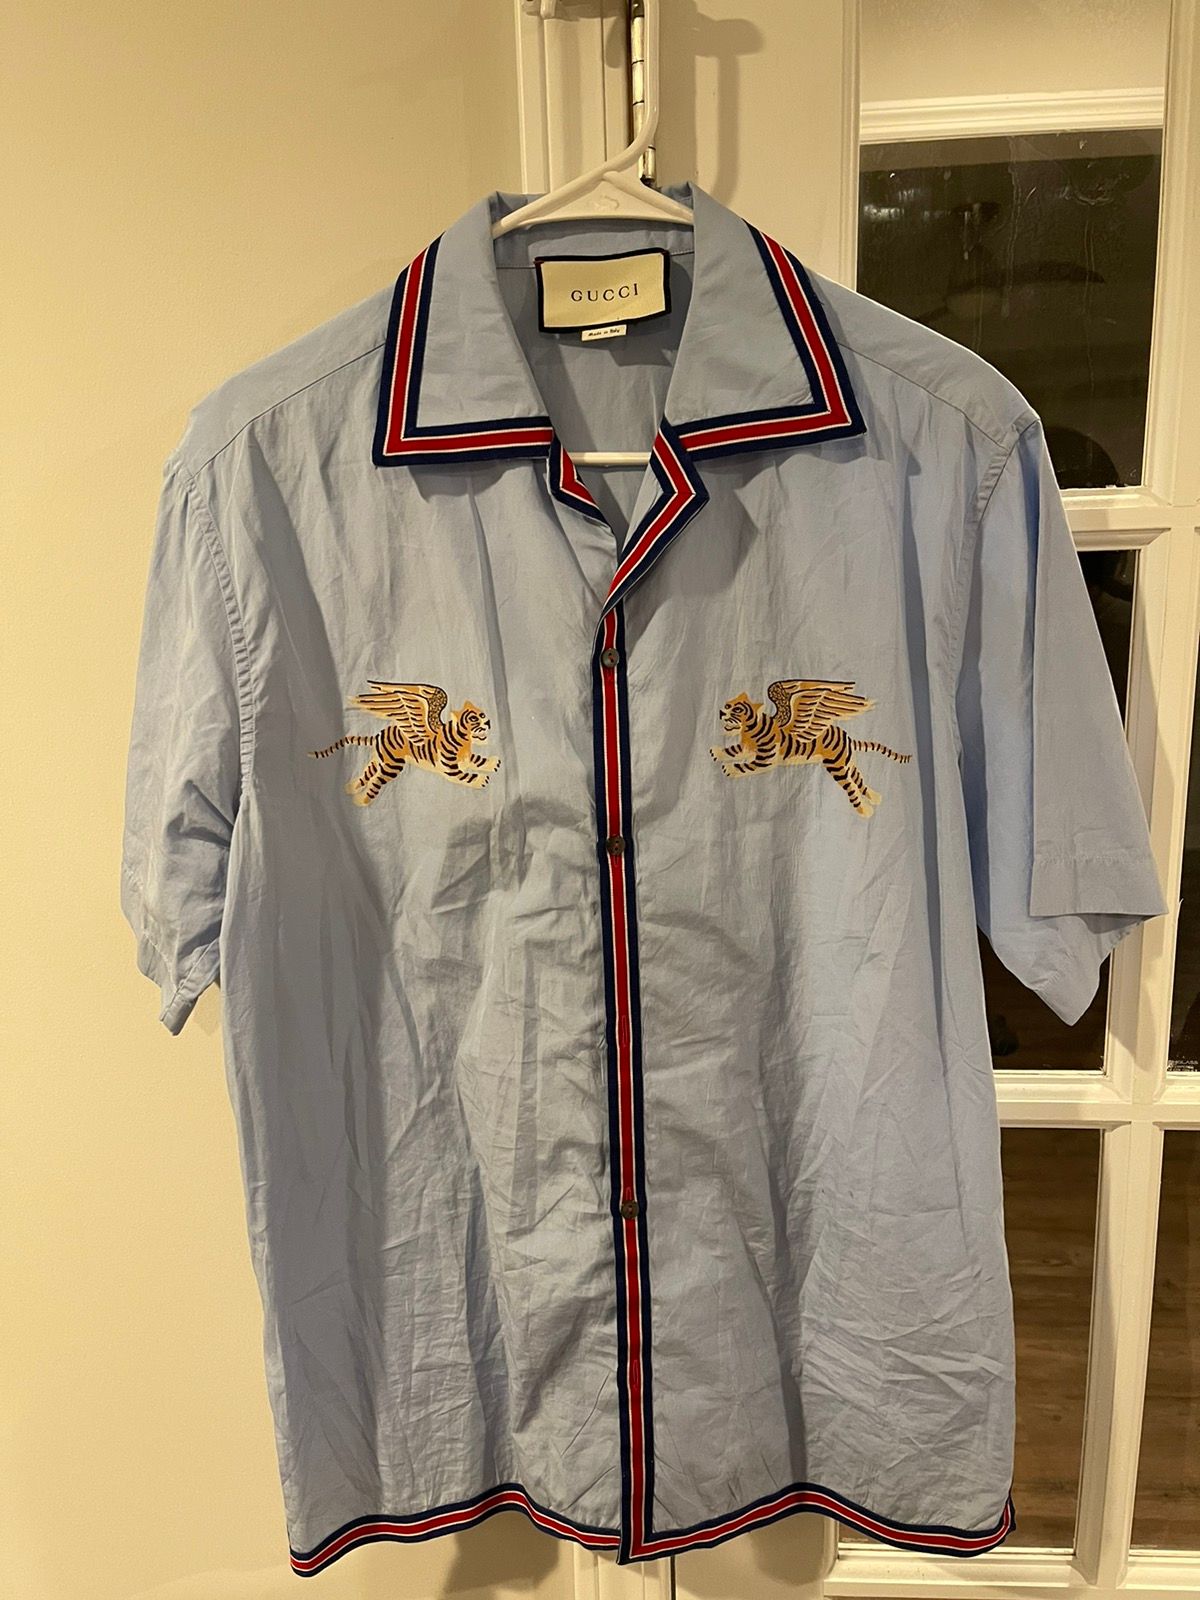 Gucci Ny Yankees Embroidered Cotton Bowling Shirt in Blue for Men